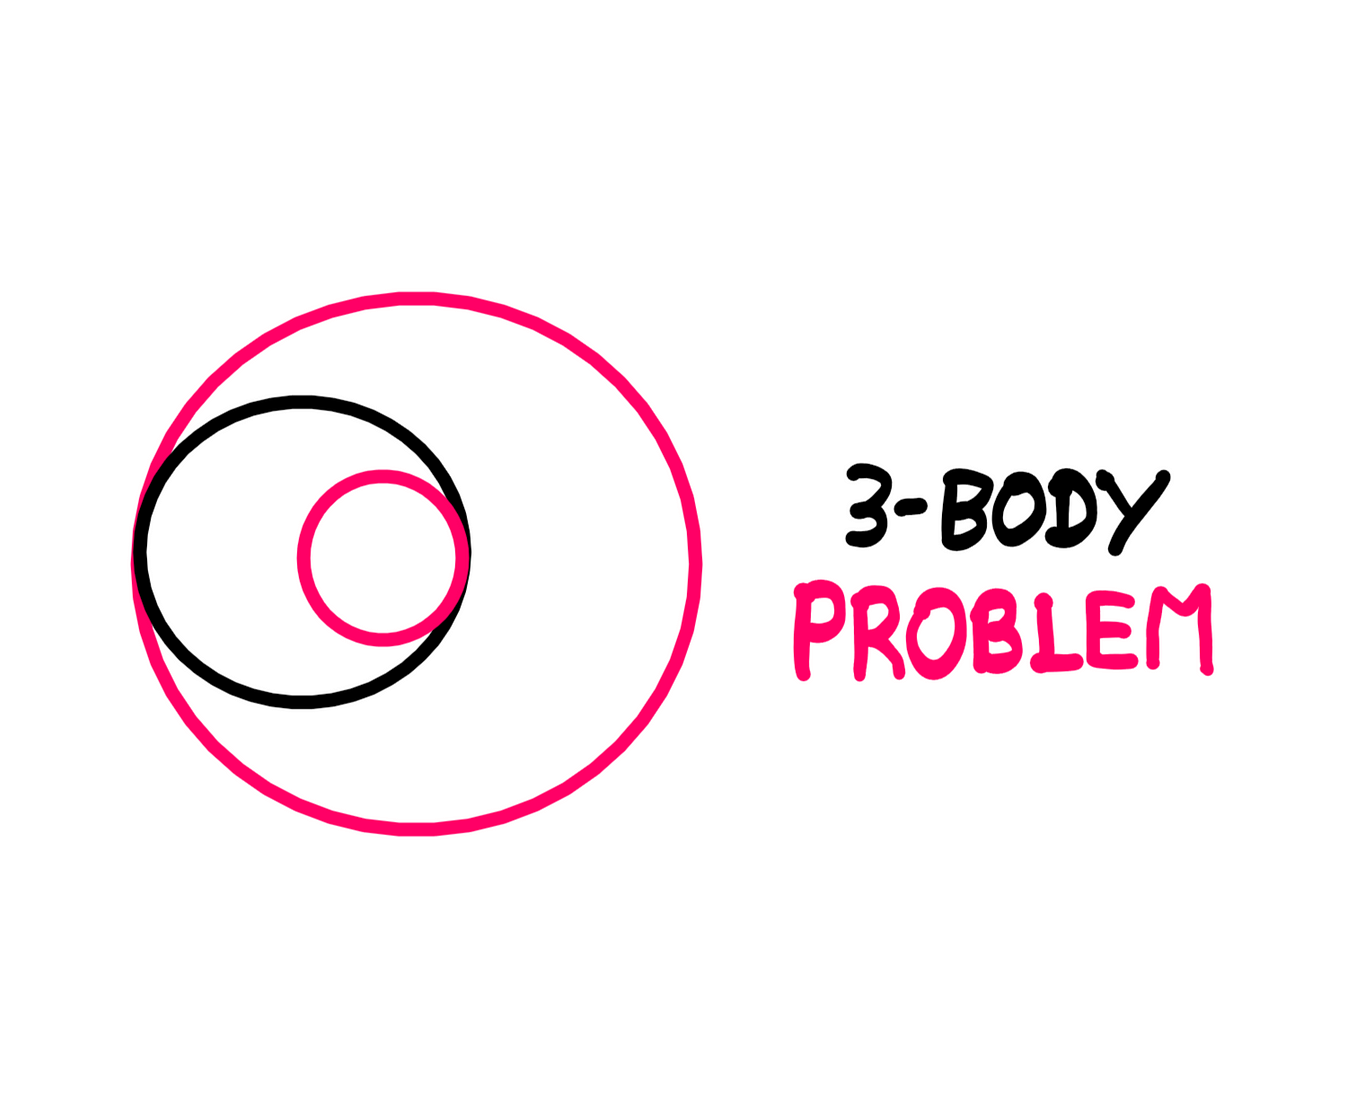 The Fascinating Story Of The Three-Body Problem — A sketch of three celestial bodies seen eclipsing each other with the text “3-body” problem written to the right of the sketch.